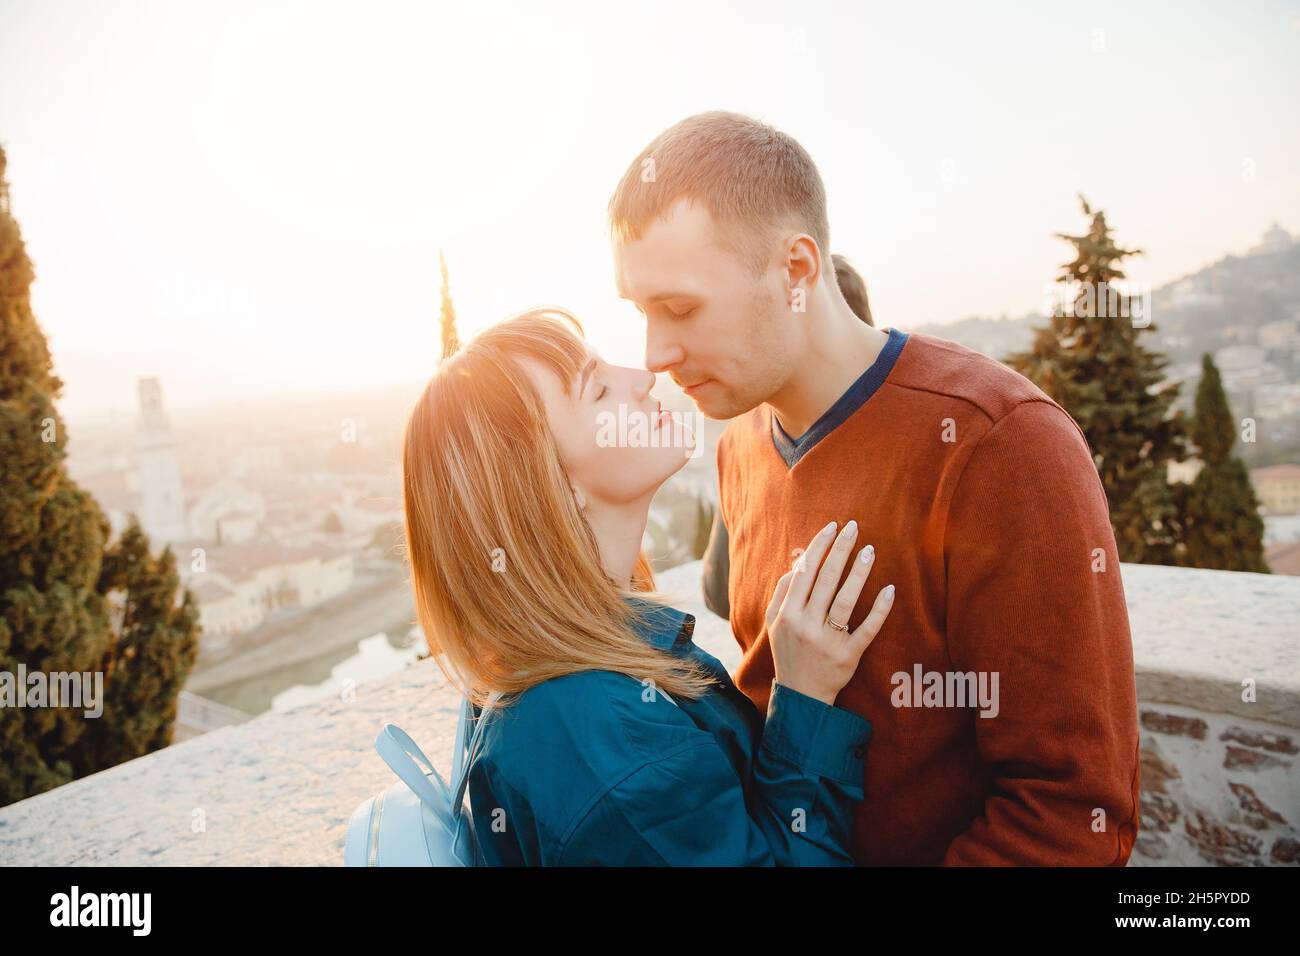 Romantic couple man and girl hug and kiss on sunset background of city Verona Italy. Travel concept. Stock Photo